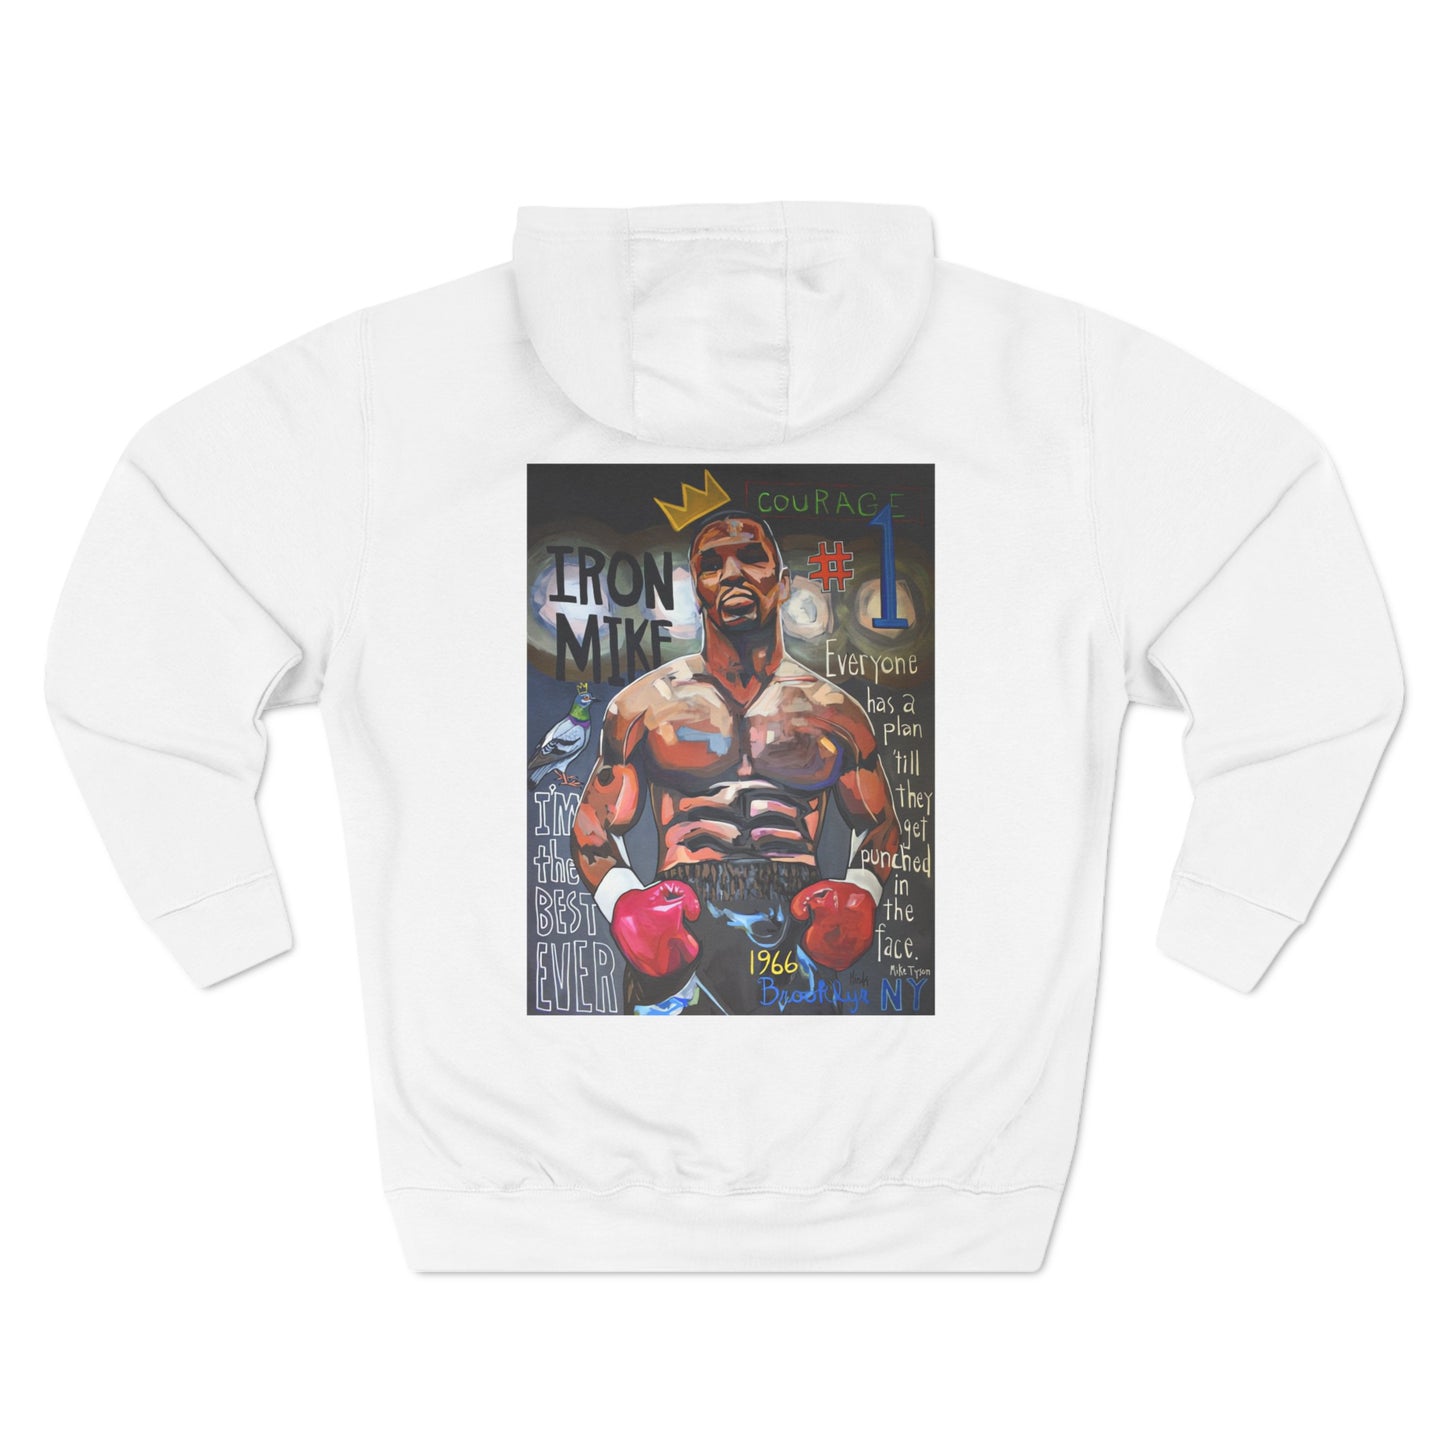 Iron Mike Tribute Pullover Hoodie - Premium Cotton Blend, Warm & Cozy